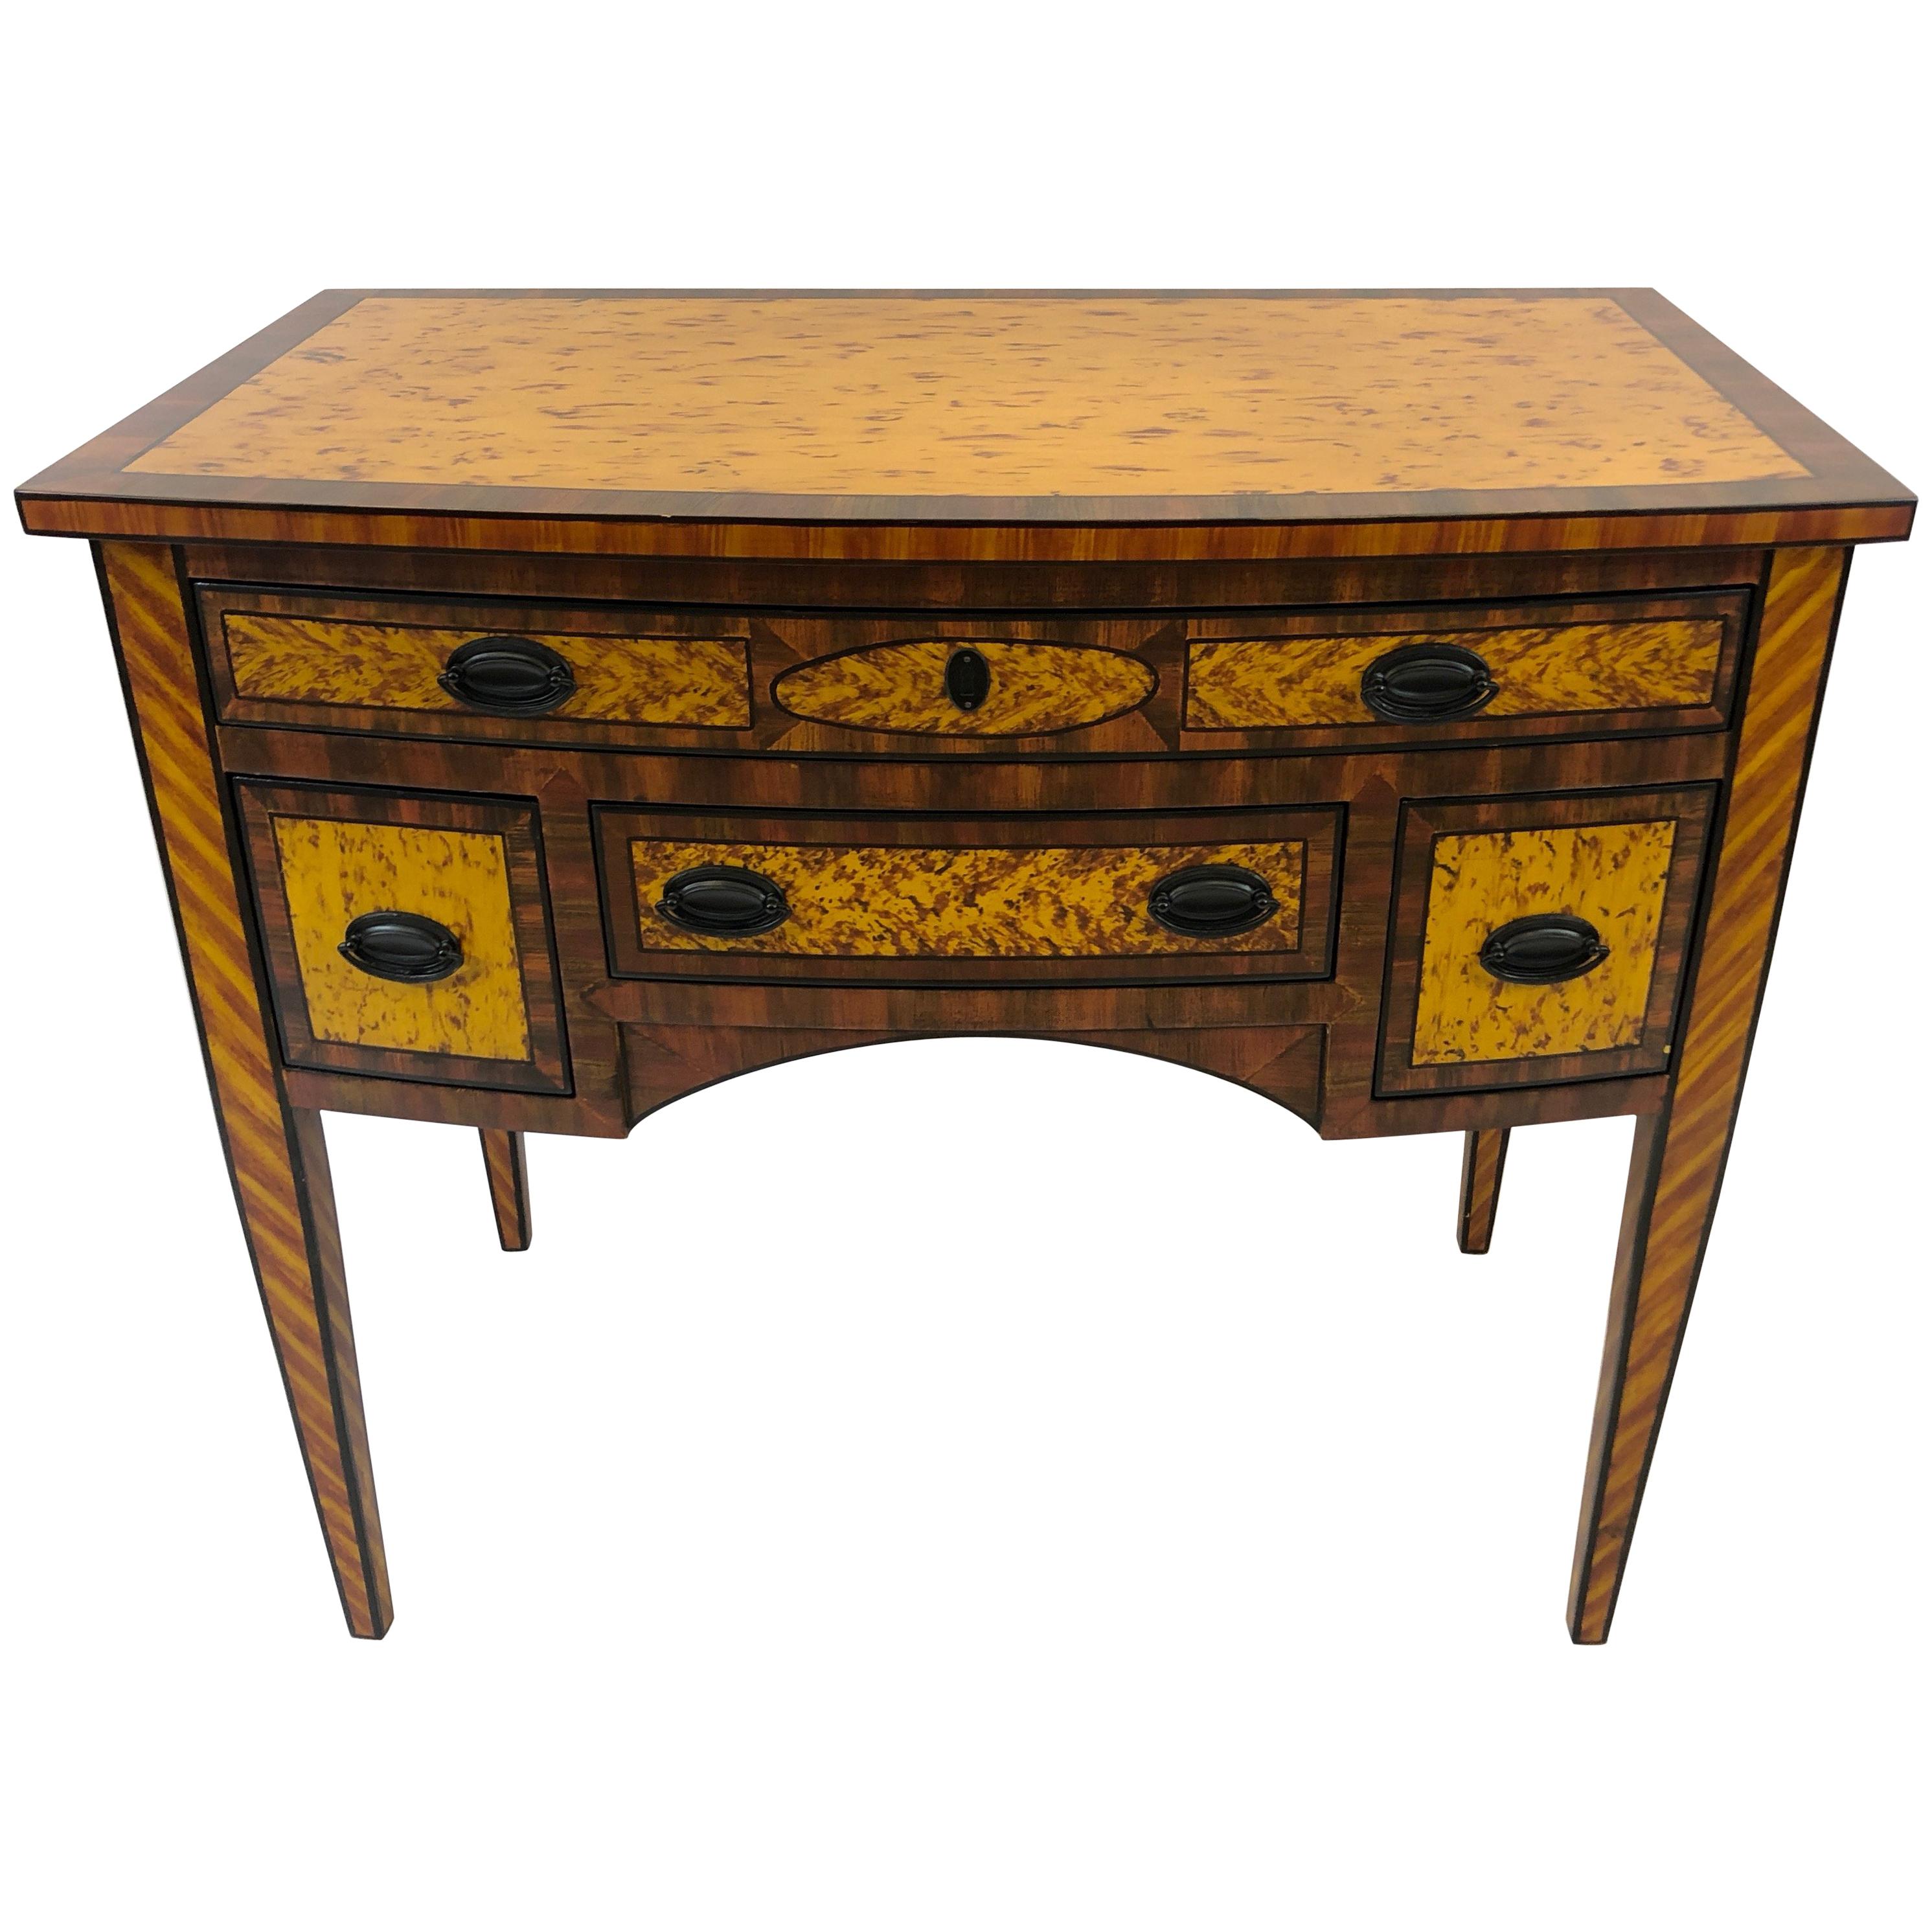 Wonderfully Decorative Grain Painted Lowboy Chest by Harden